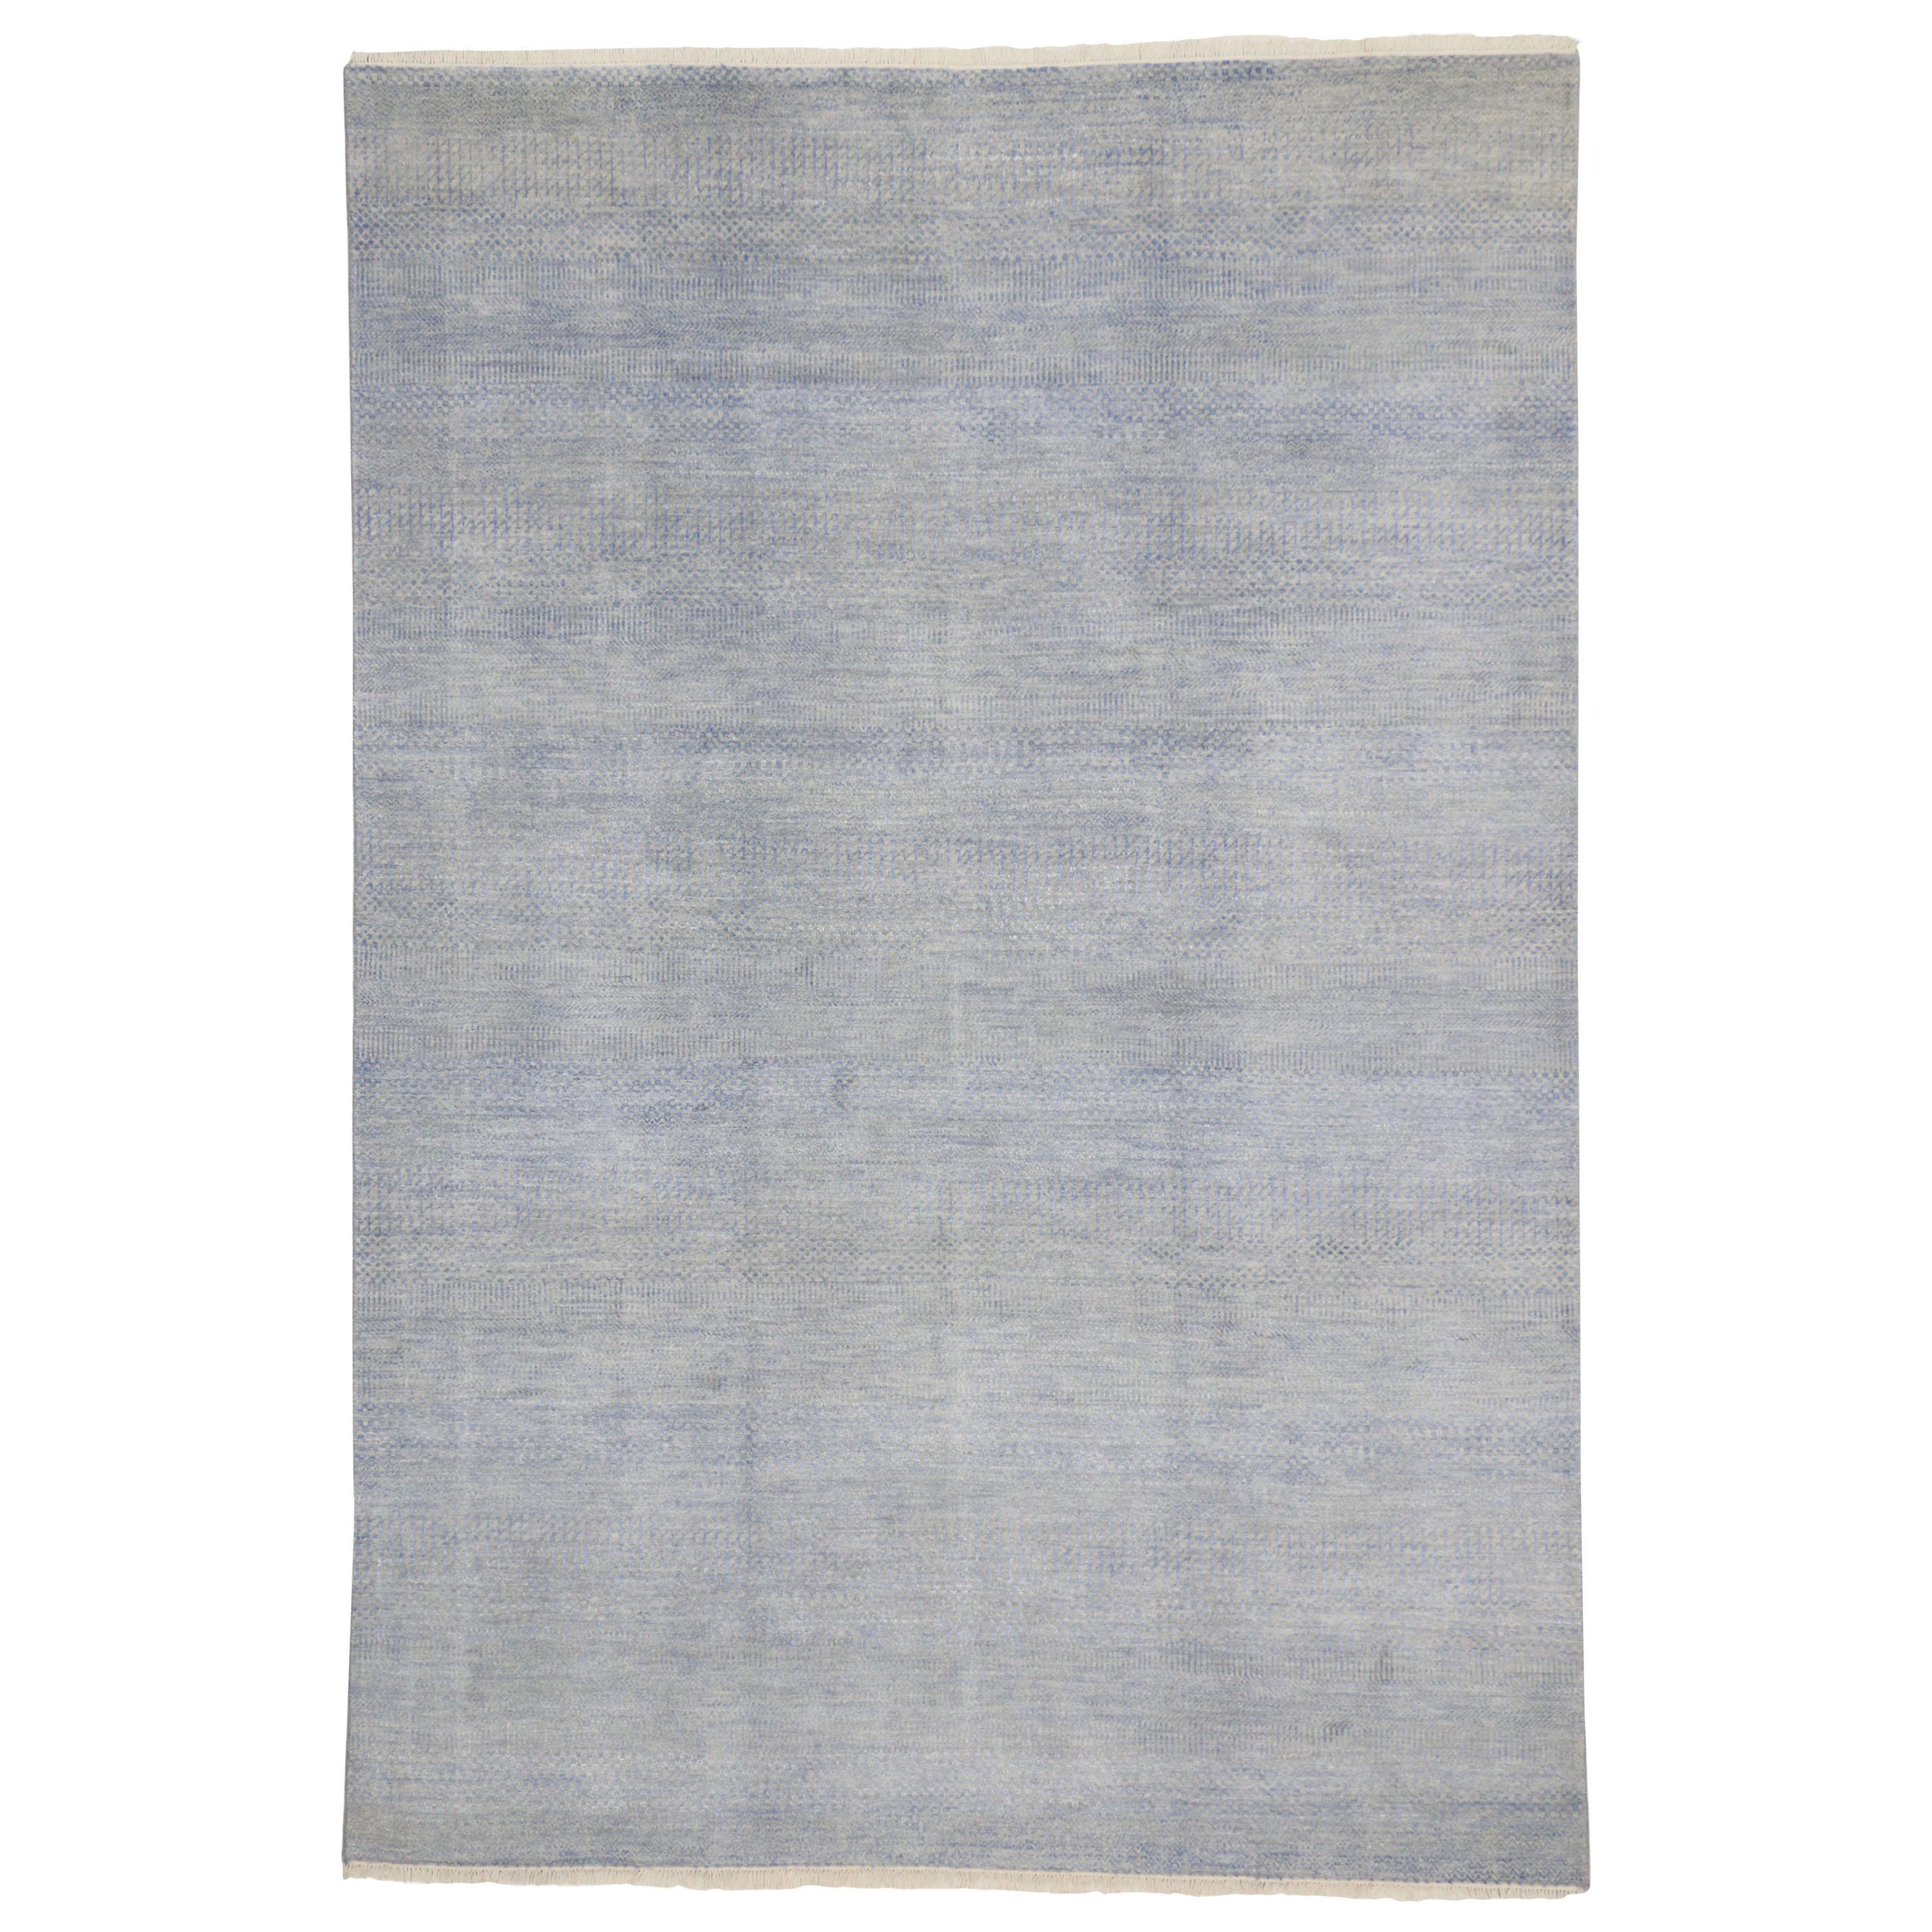 New Contemporary Transitional Area Rug with Minimalist International Style For Sale